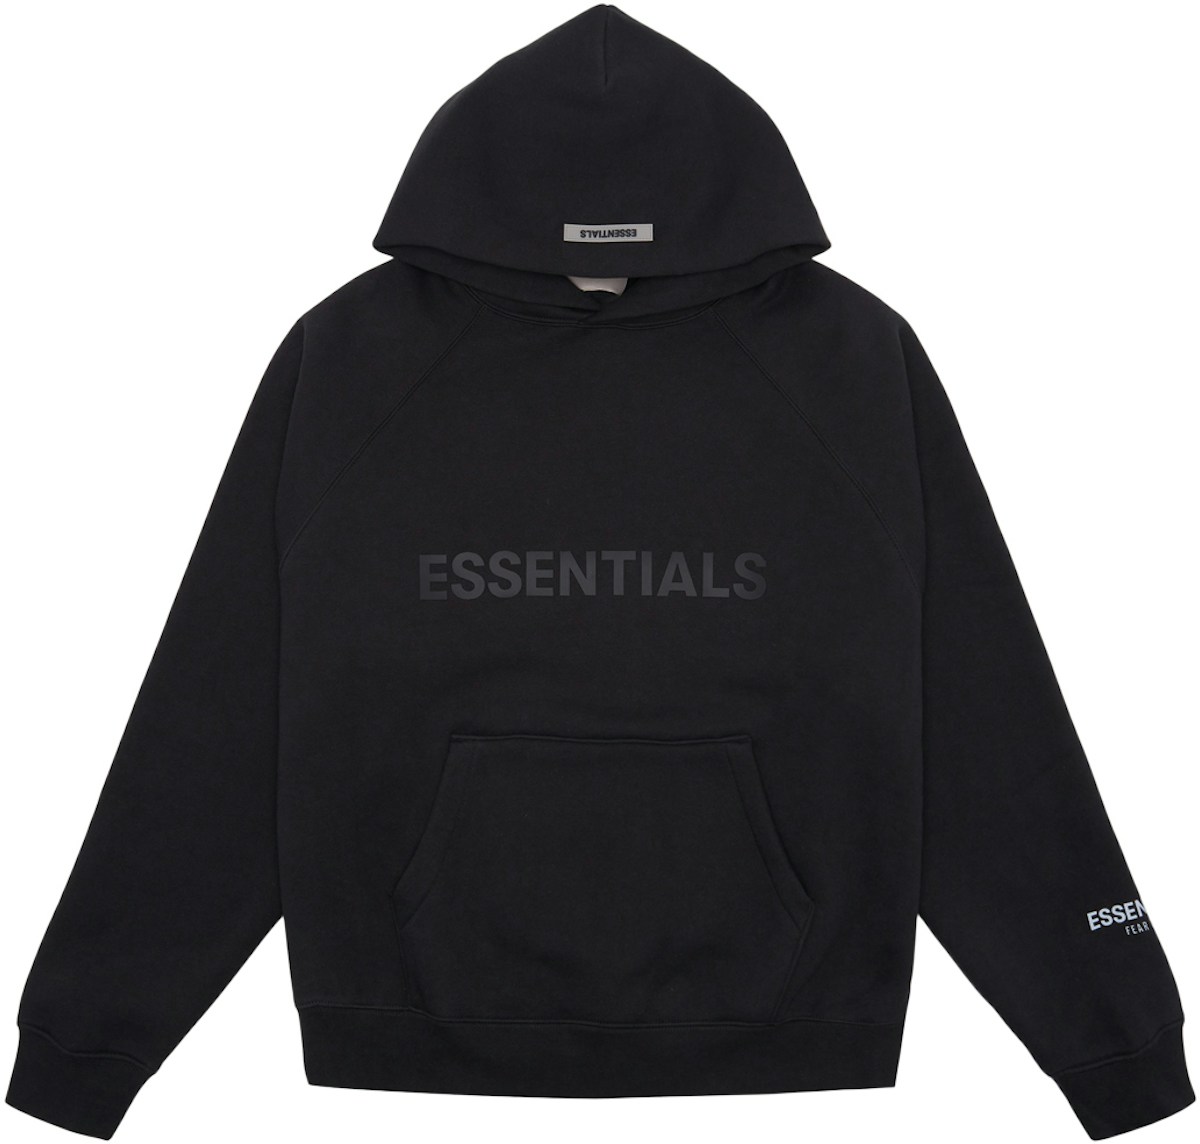 FEAR OF GOD ESSENTIALS 3D Silicon Applique Pullover Hoodie Dark Slate